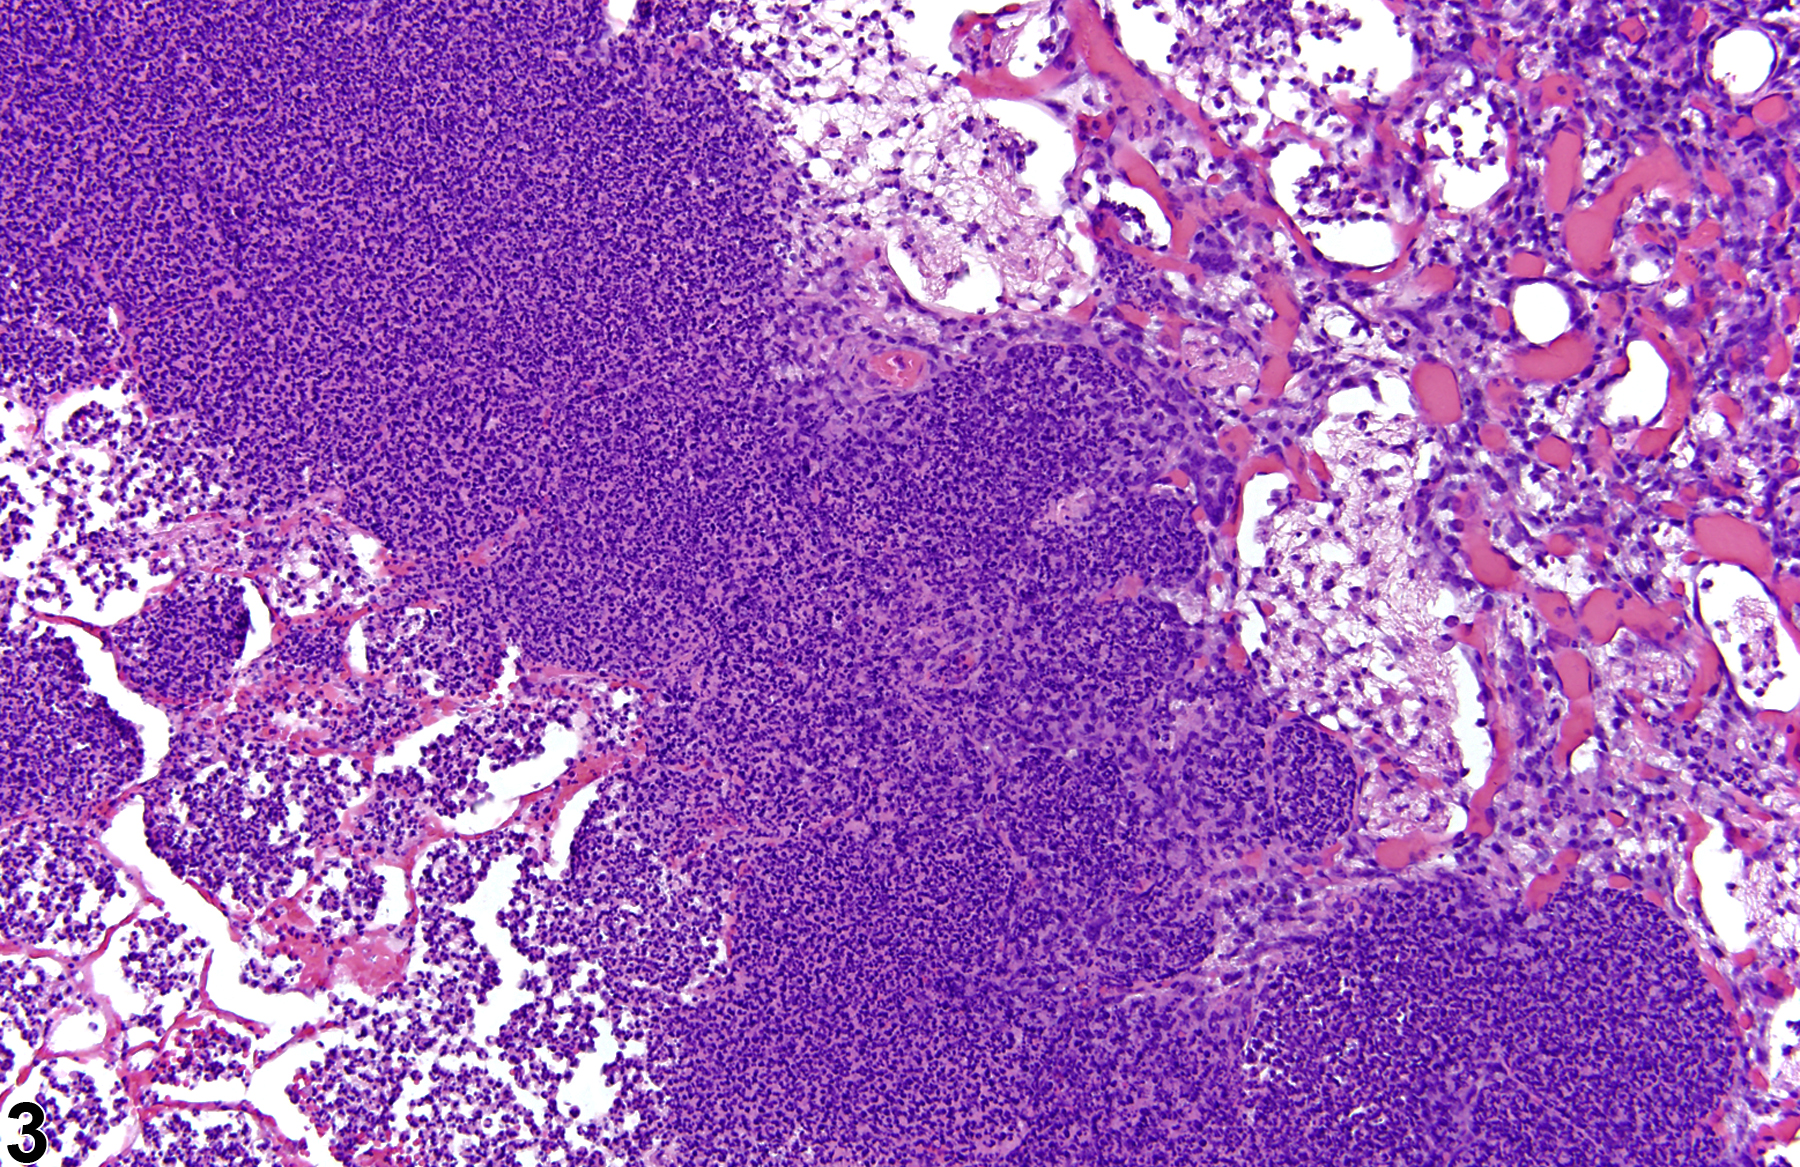 Image of suppurative inflammation in the lung from a male Wistar Han rat in a chronic study